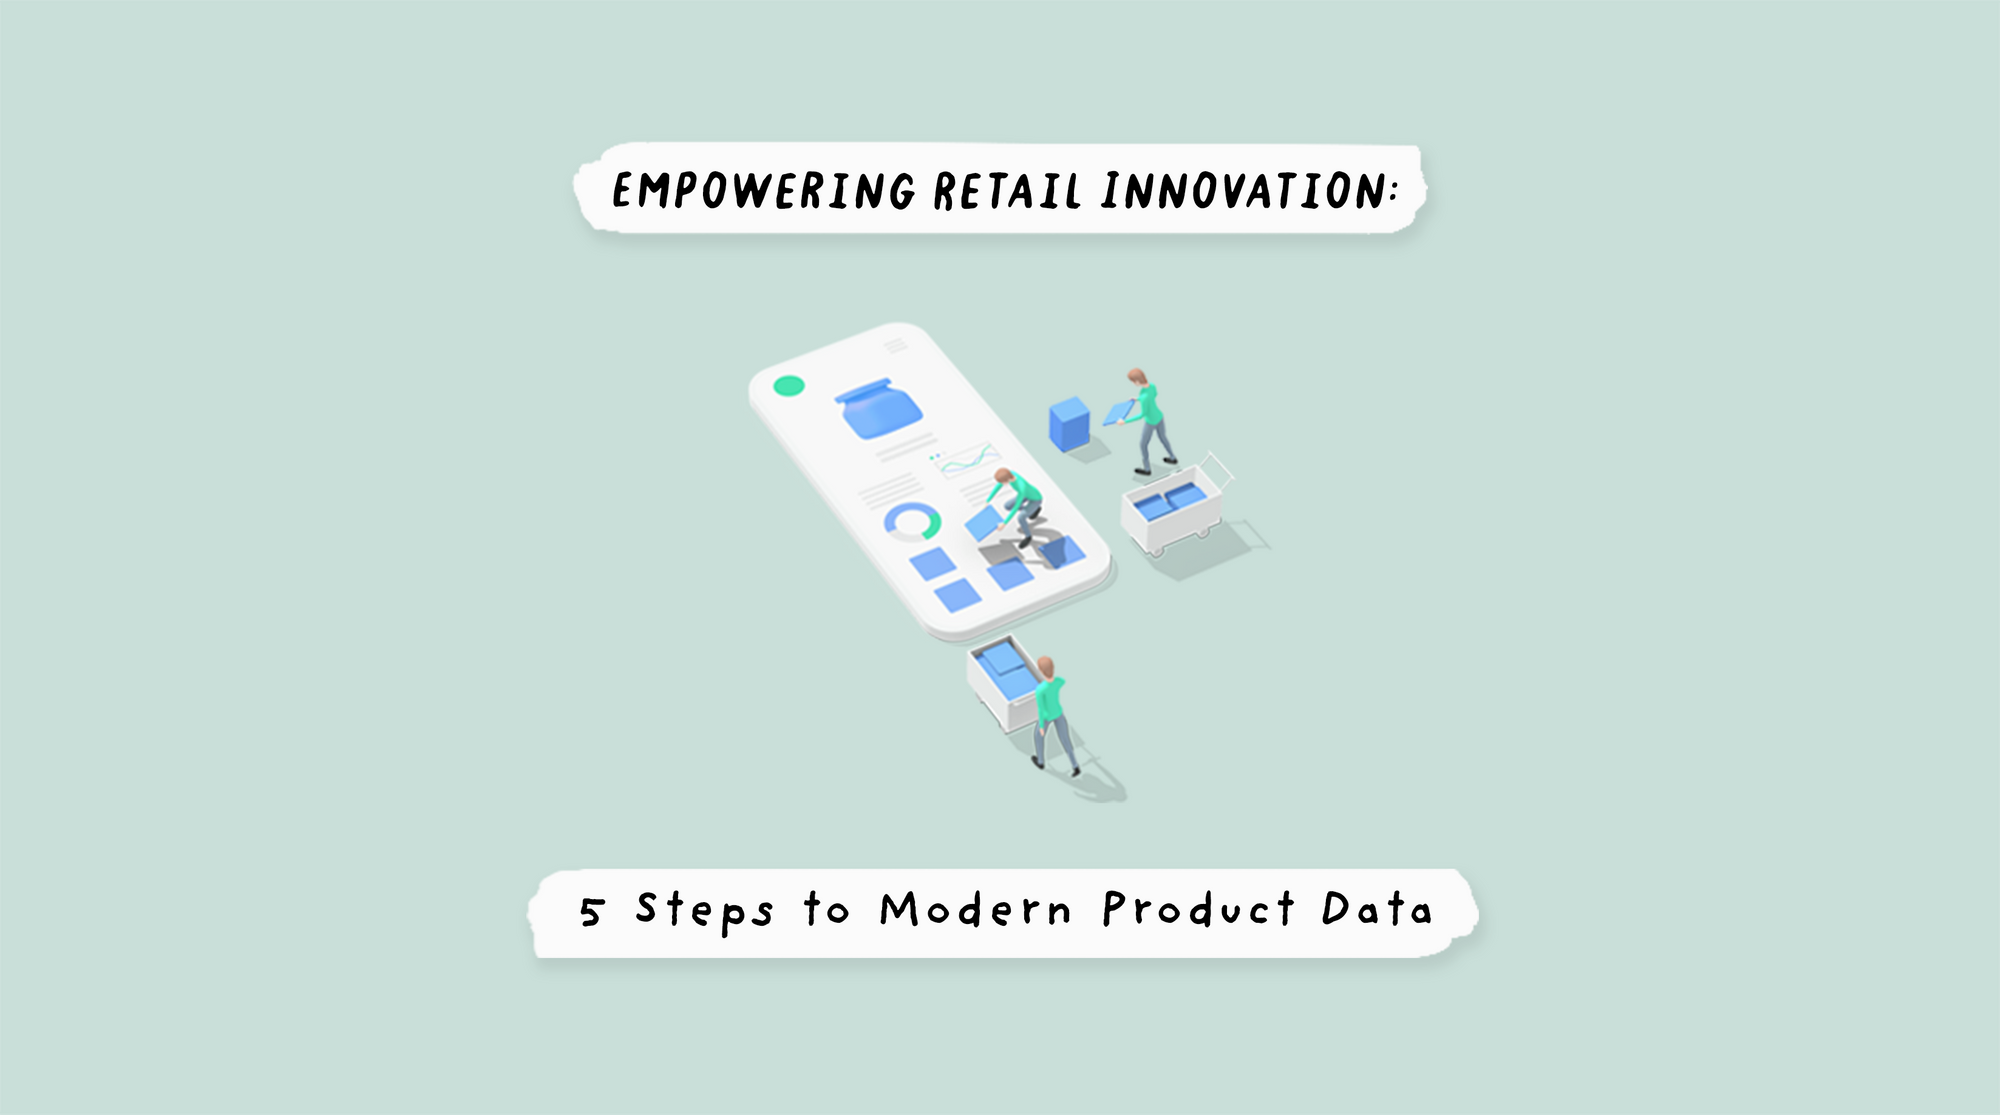 Empowering Retail Innovation: 5 Steps to Modern Product Data